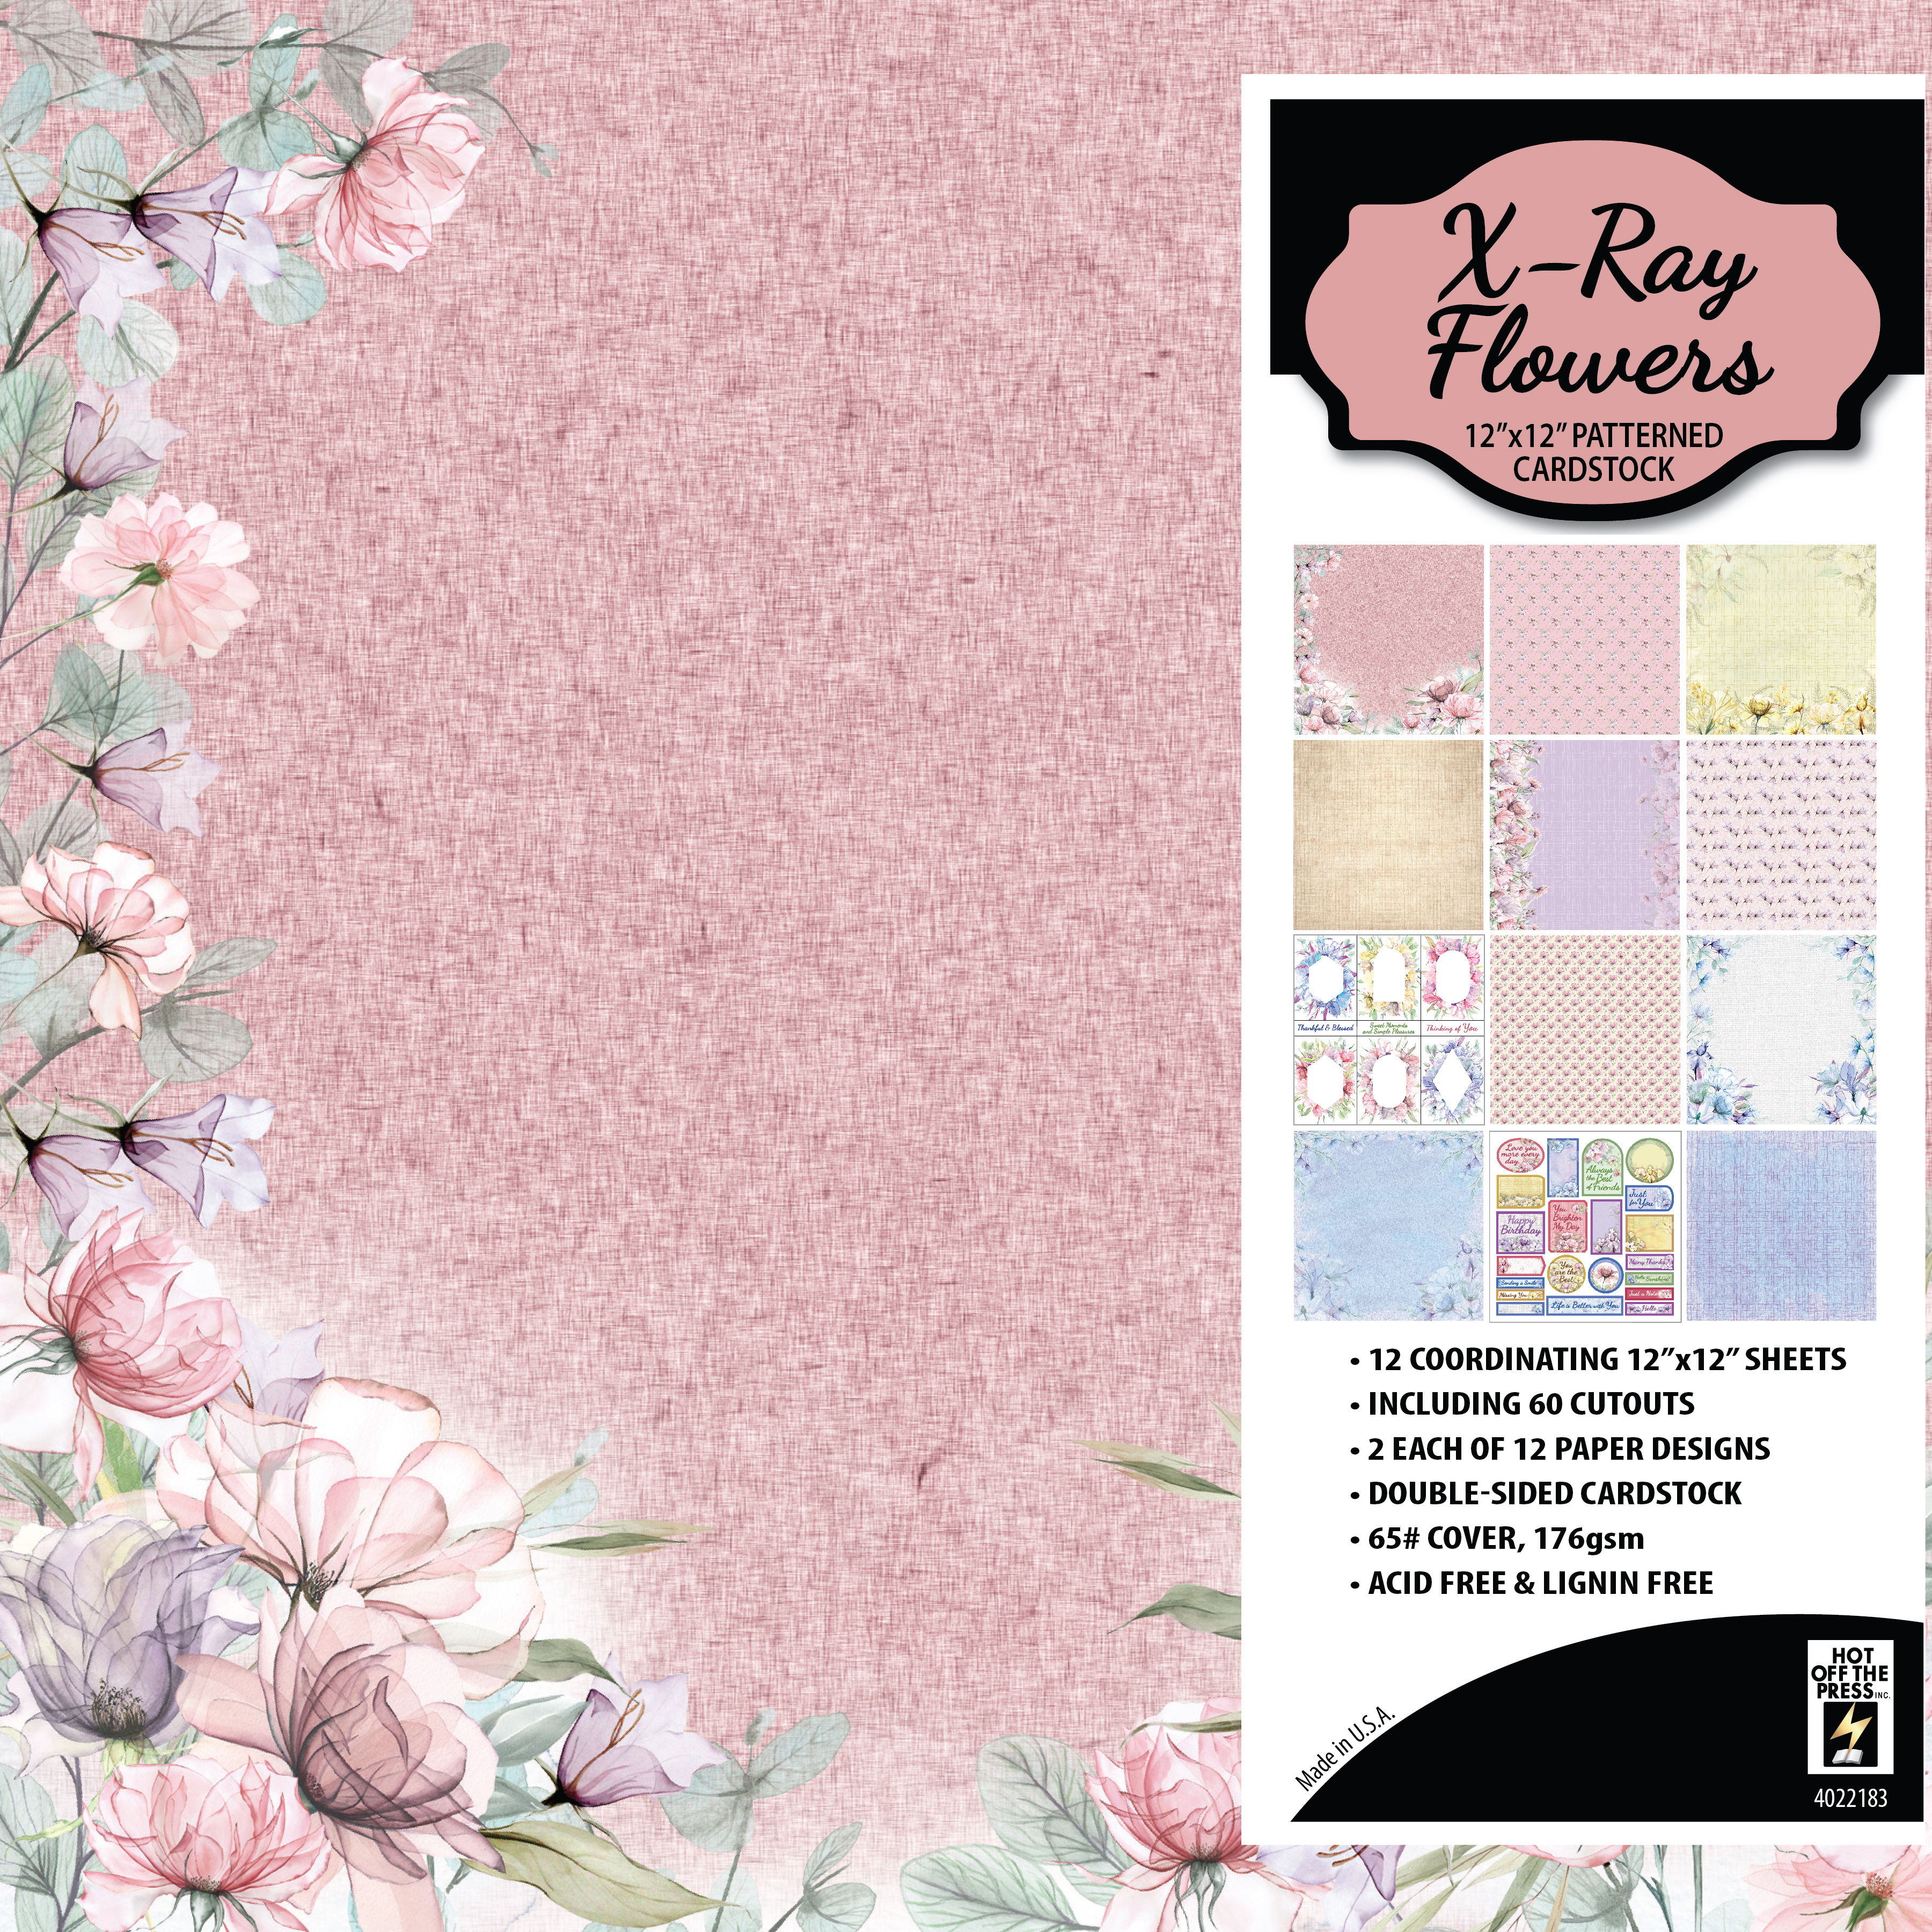 X-Ray Flowers 12x12 Patterned Cardstock